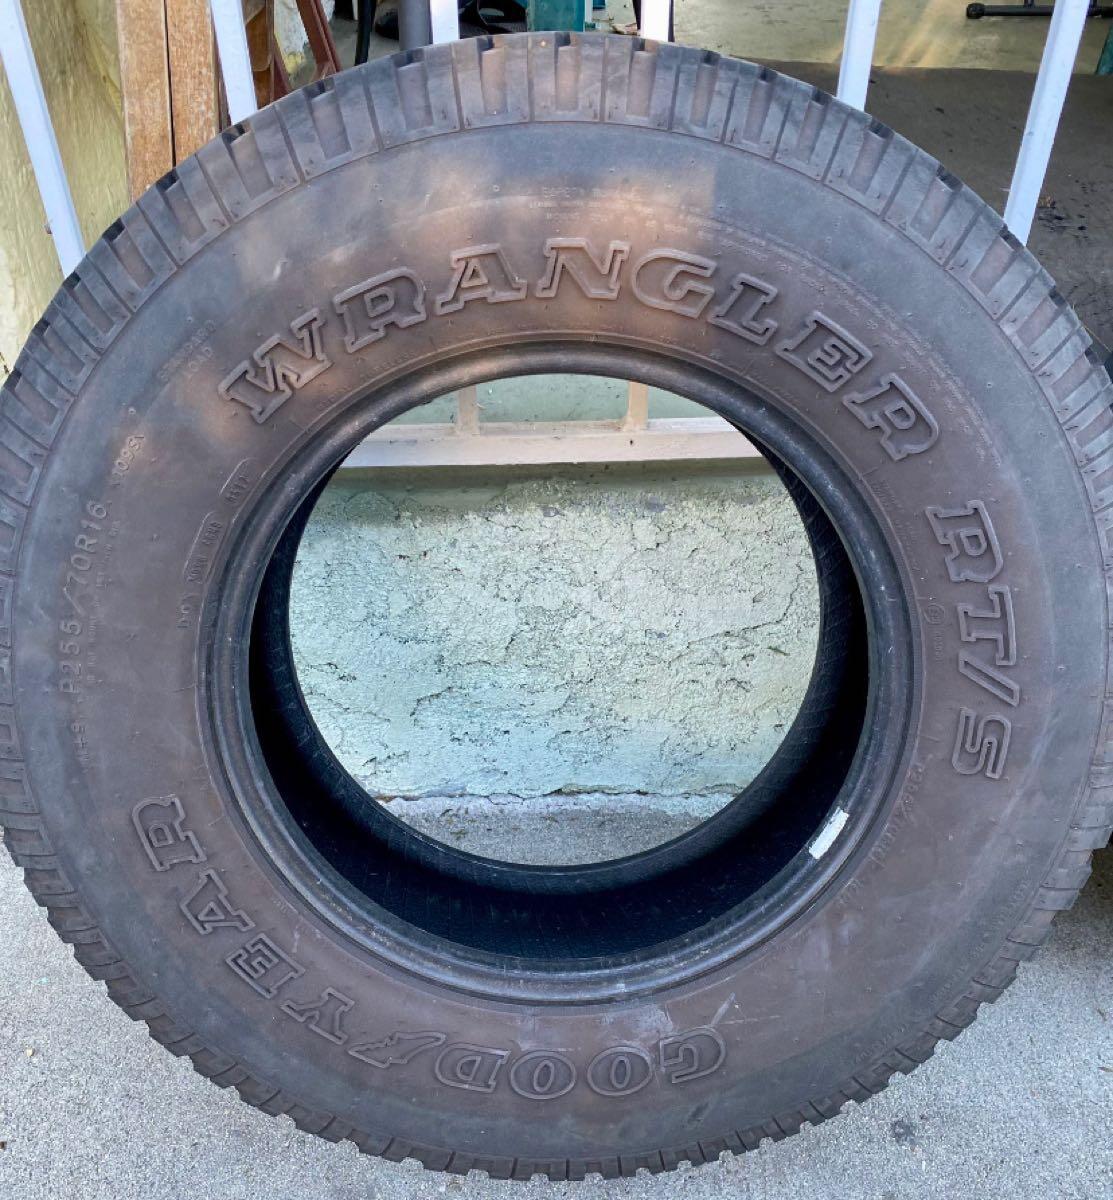 GOOD YEAR WRANGLER RT/S Size P255/70R16 — USED for $30 in Los Angeles, CA |  Finds — Nextdoor